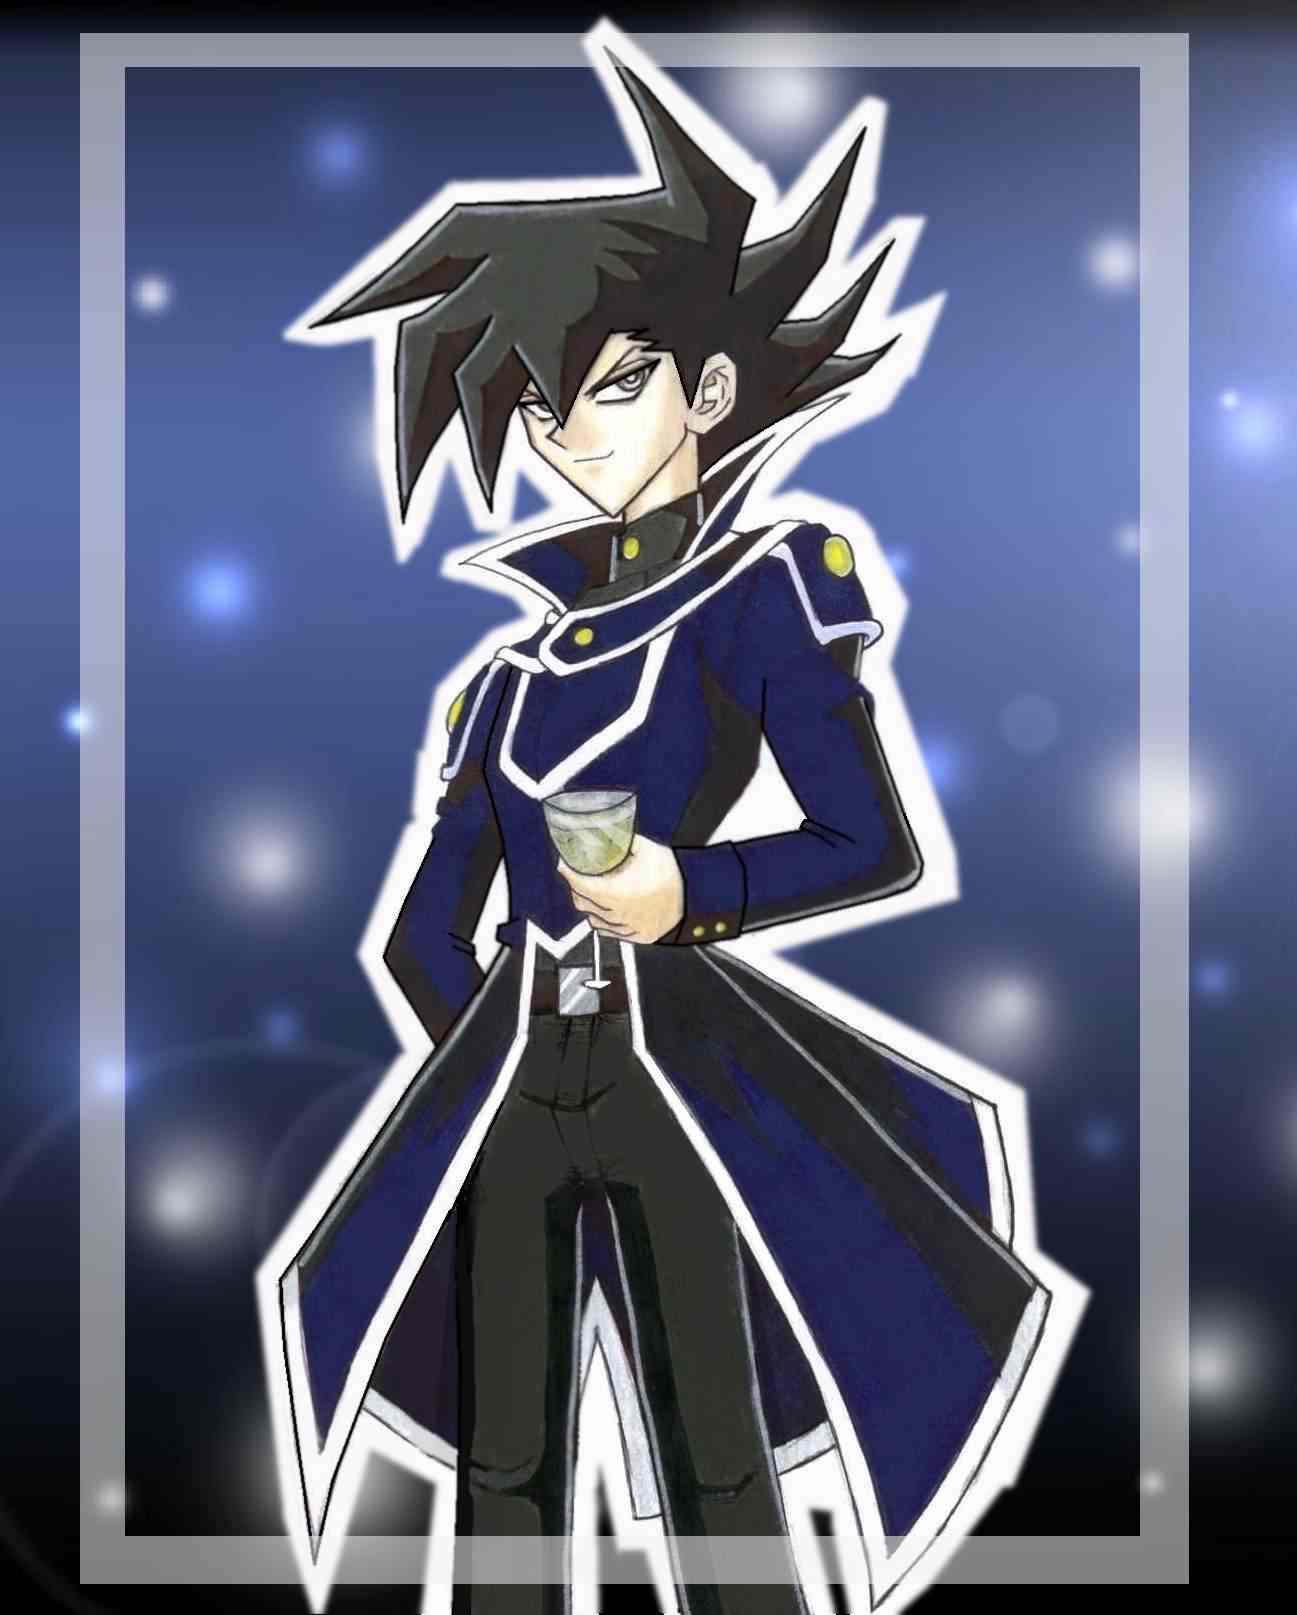 Chazz/Manjoume by hellpoemer